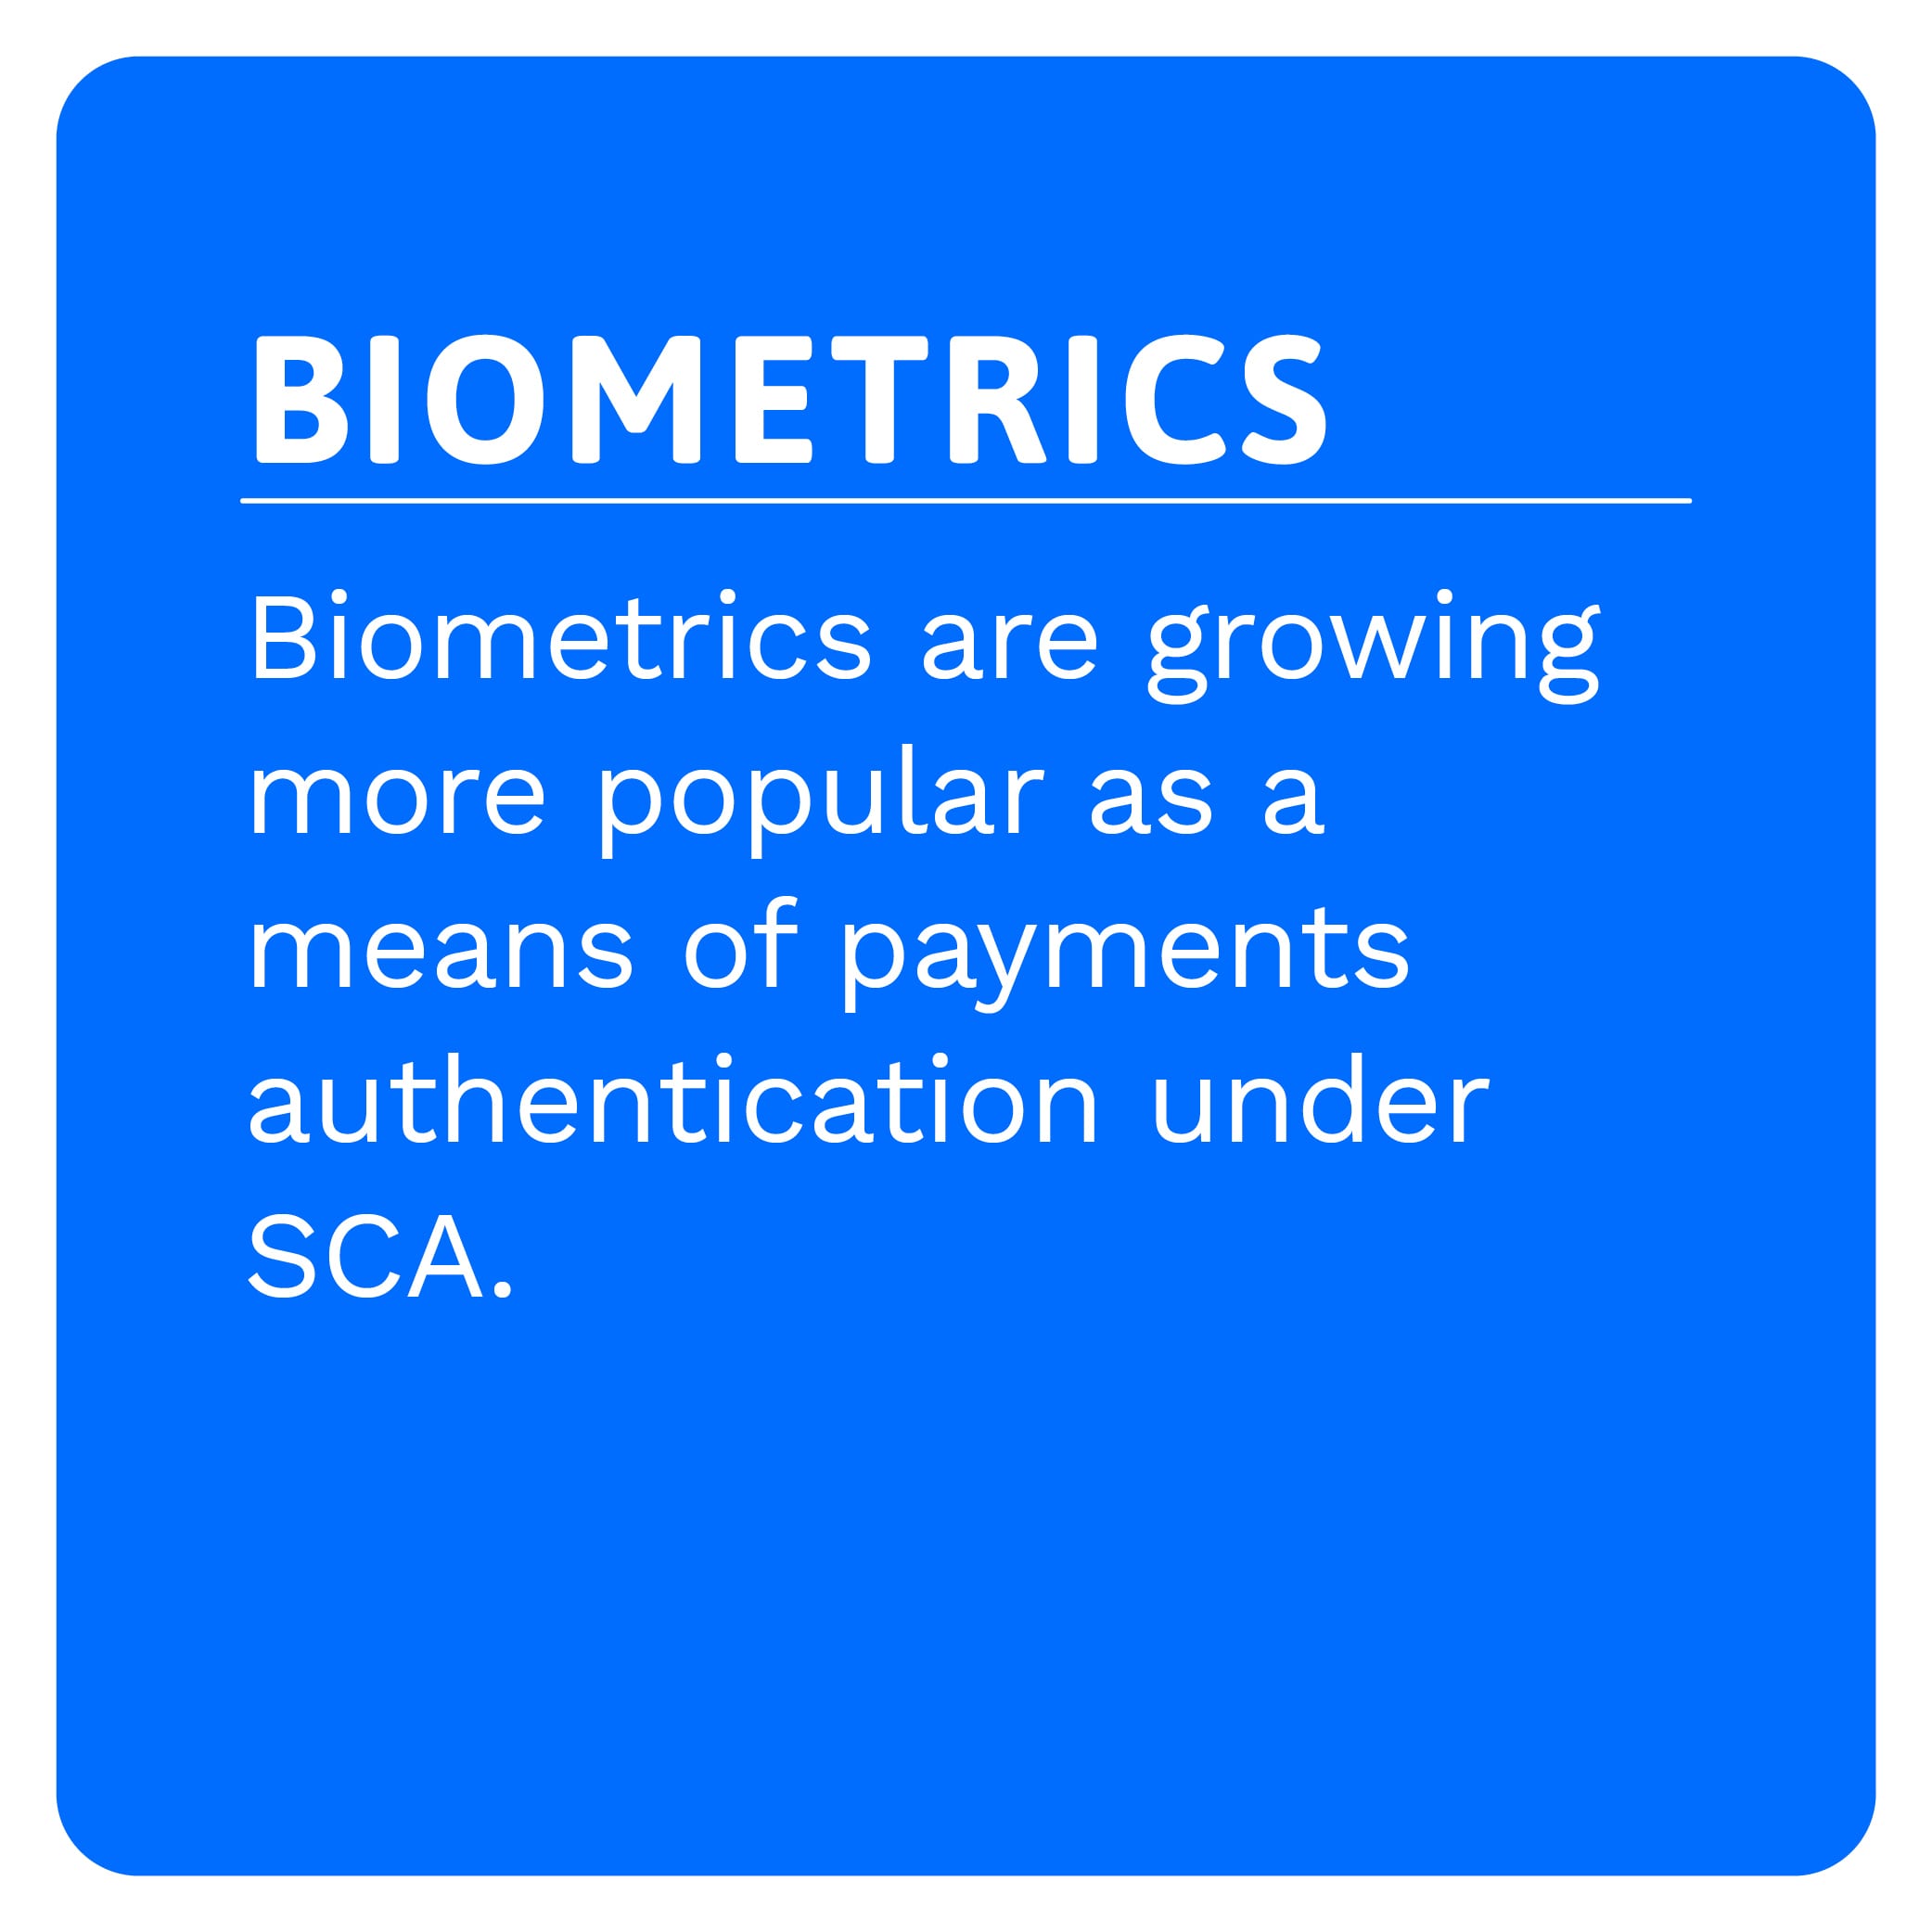 BIOMETRICS: Biometrics are growing more popular as a means of payments authentication under SCA.